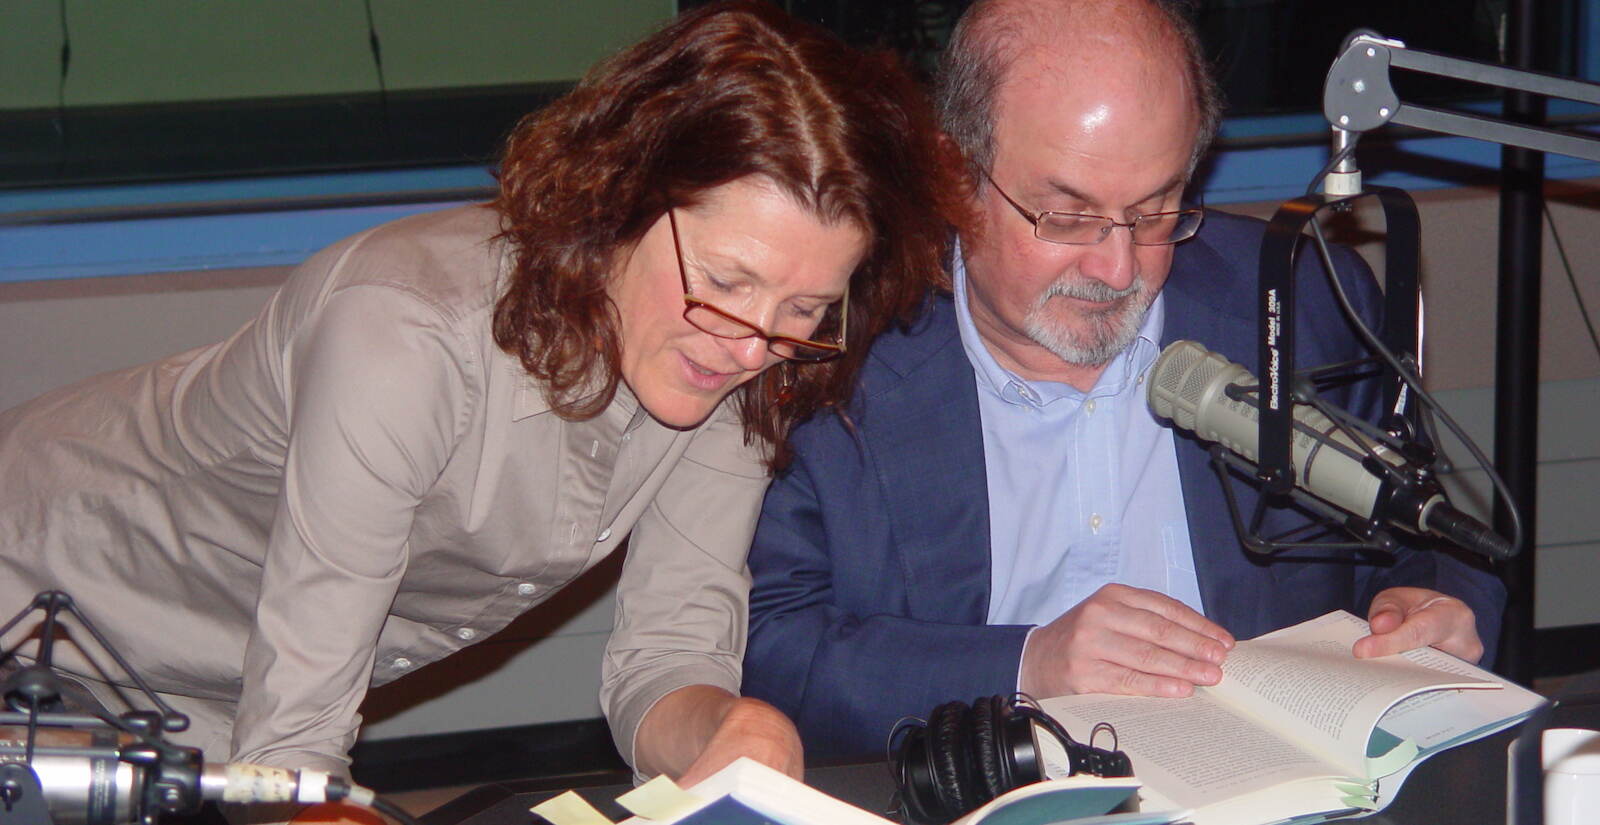 Marty Moss-Coane and Salman Rushdie hold open books next to one another